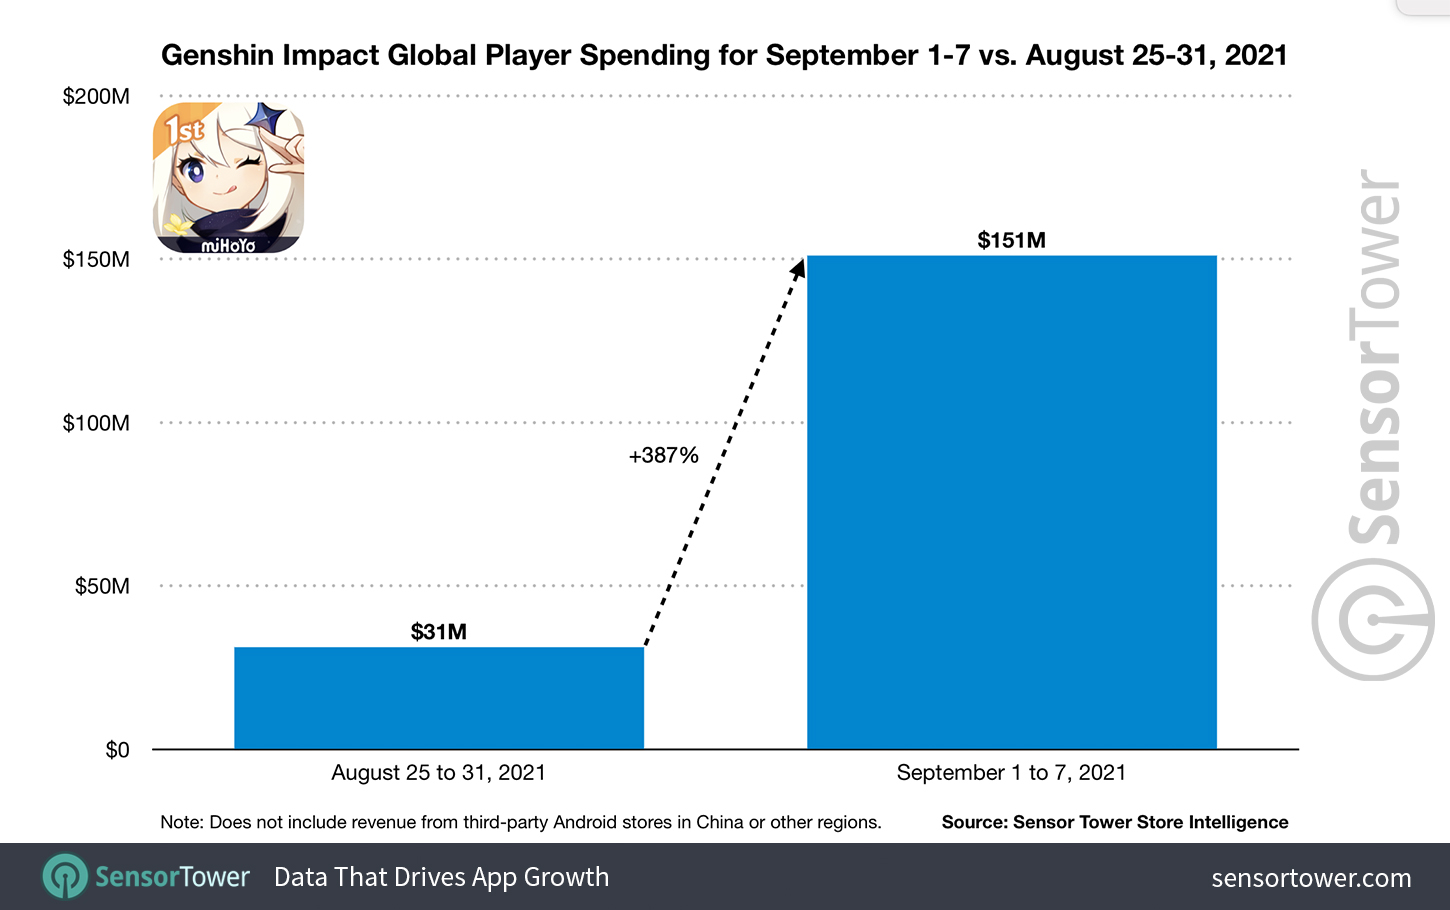 Genshin Impact Global Player Spending September 1 to 7 versus August 25 to 31